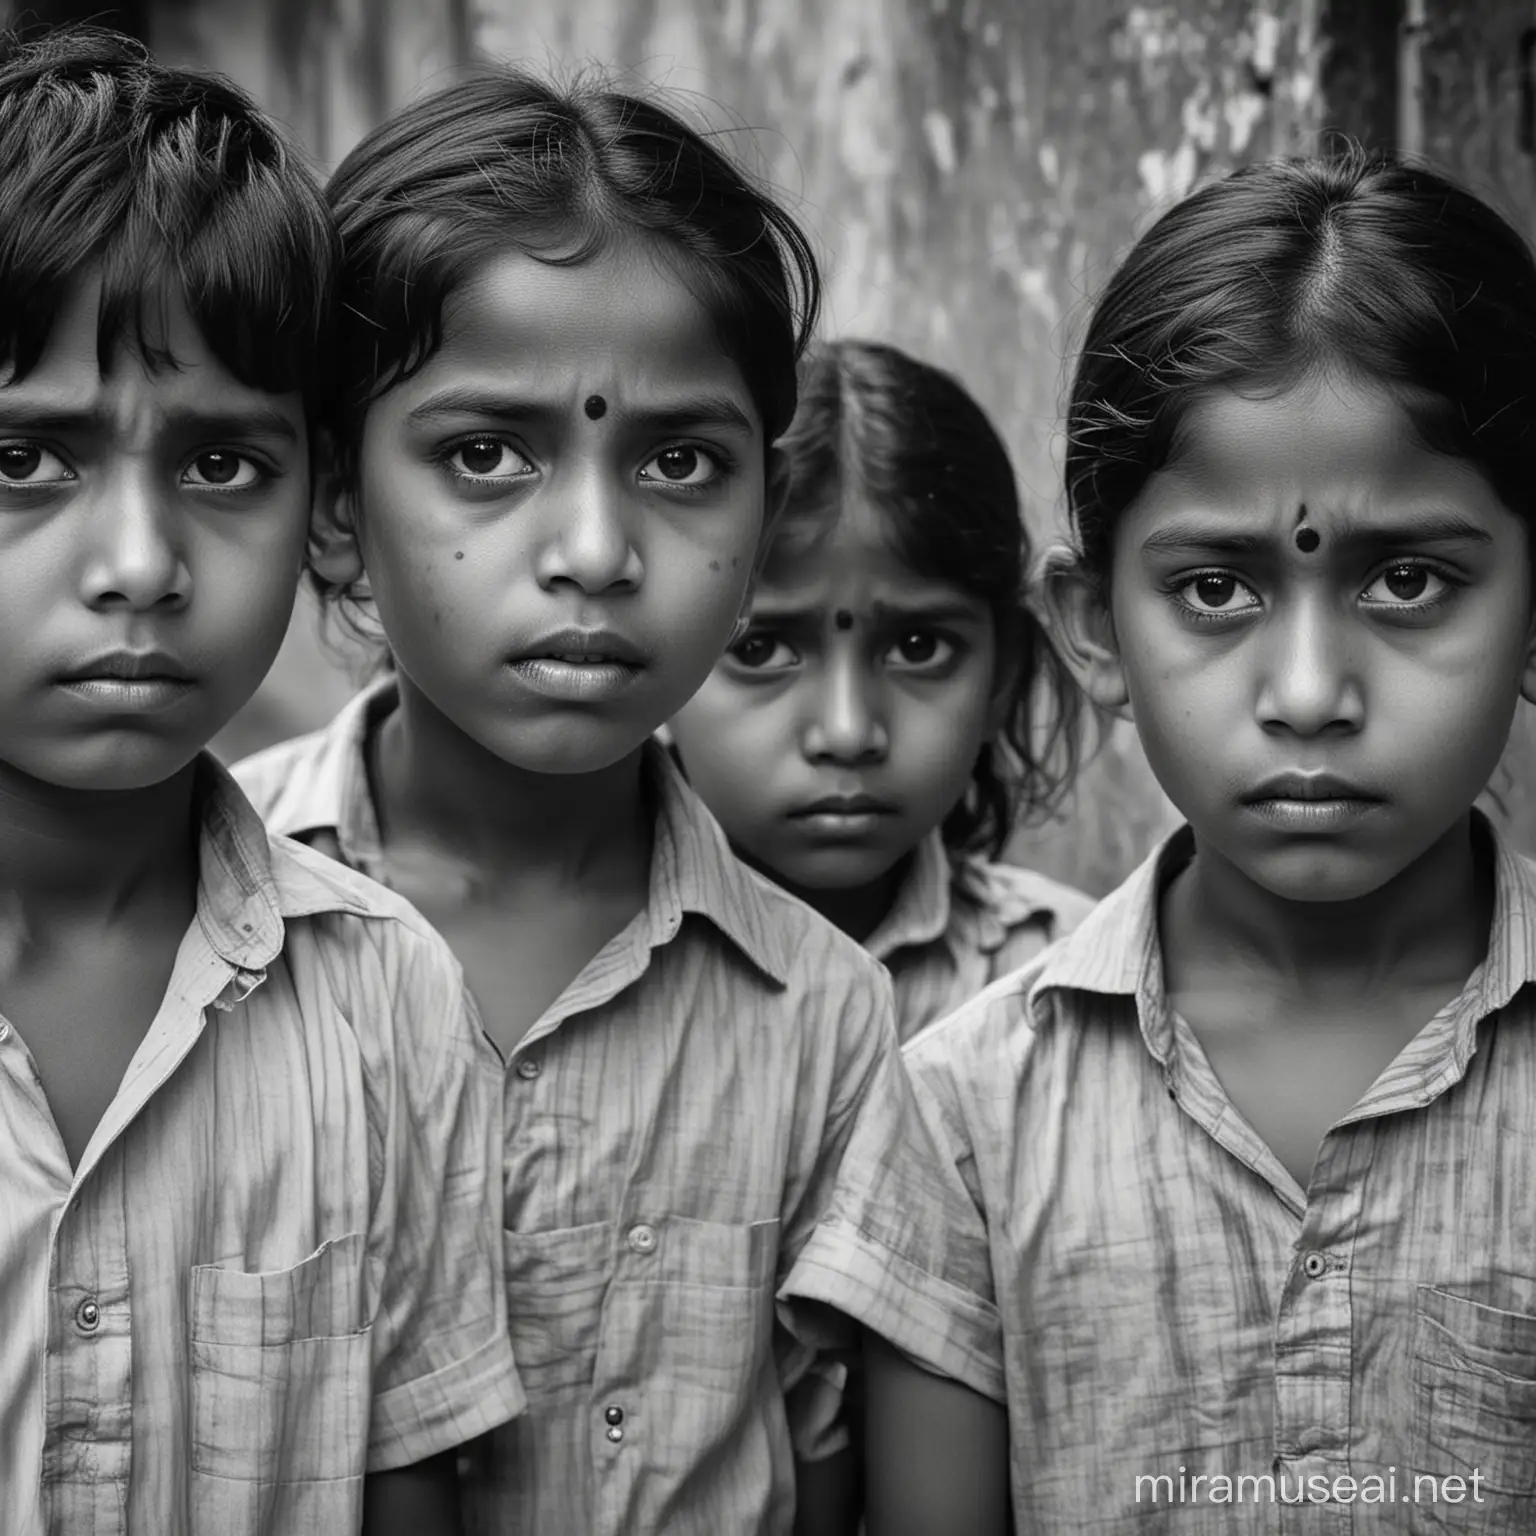 Indian Children Expressing Sadness in Black and White